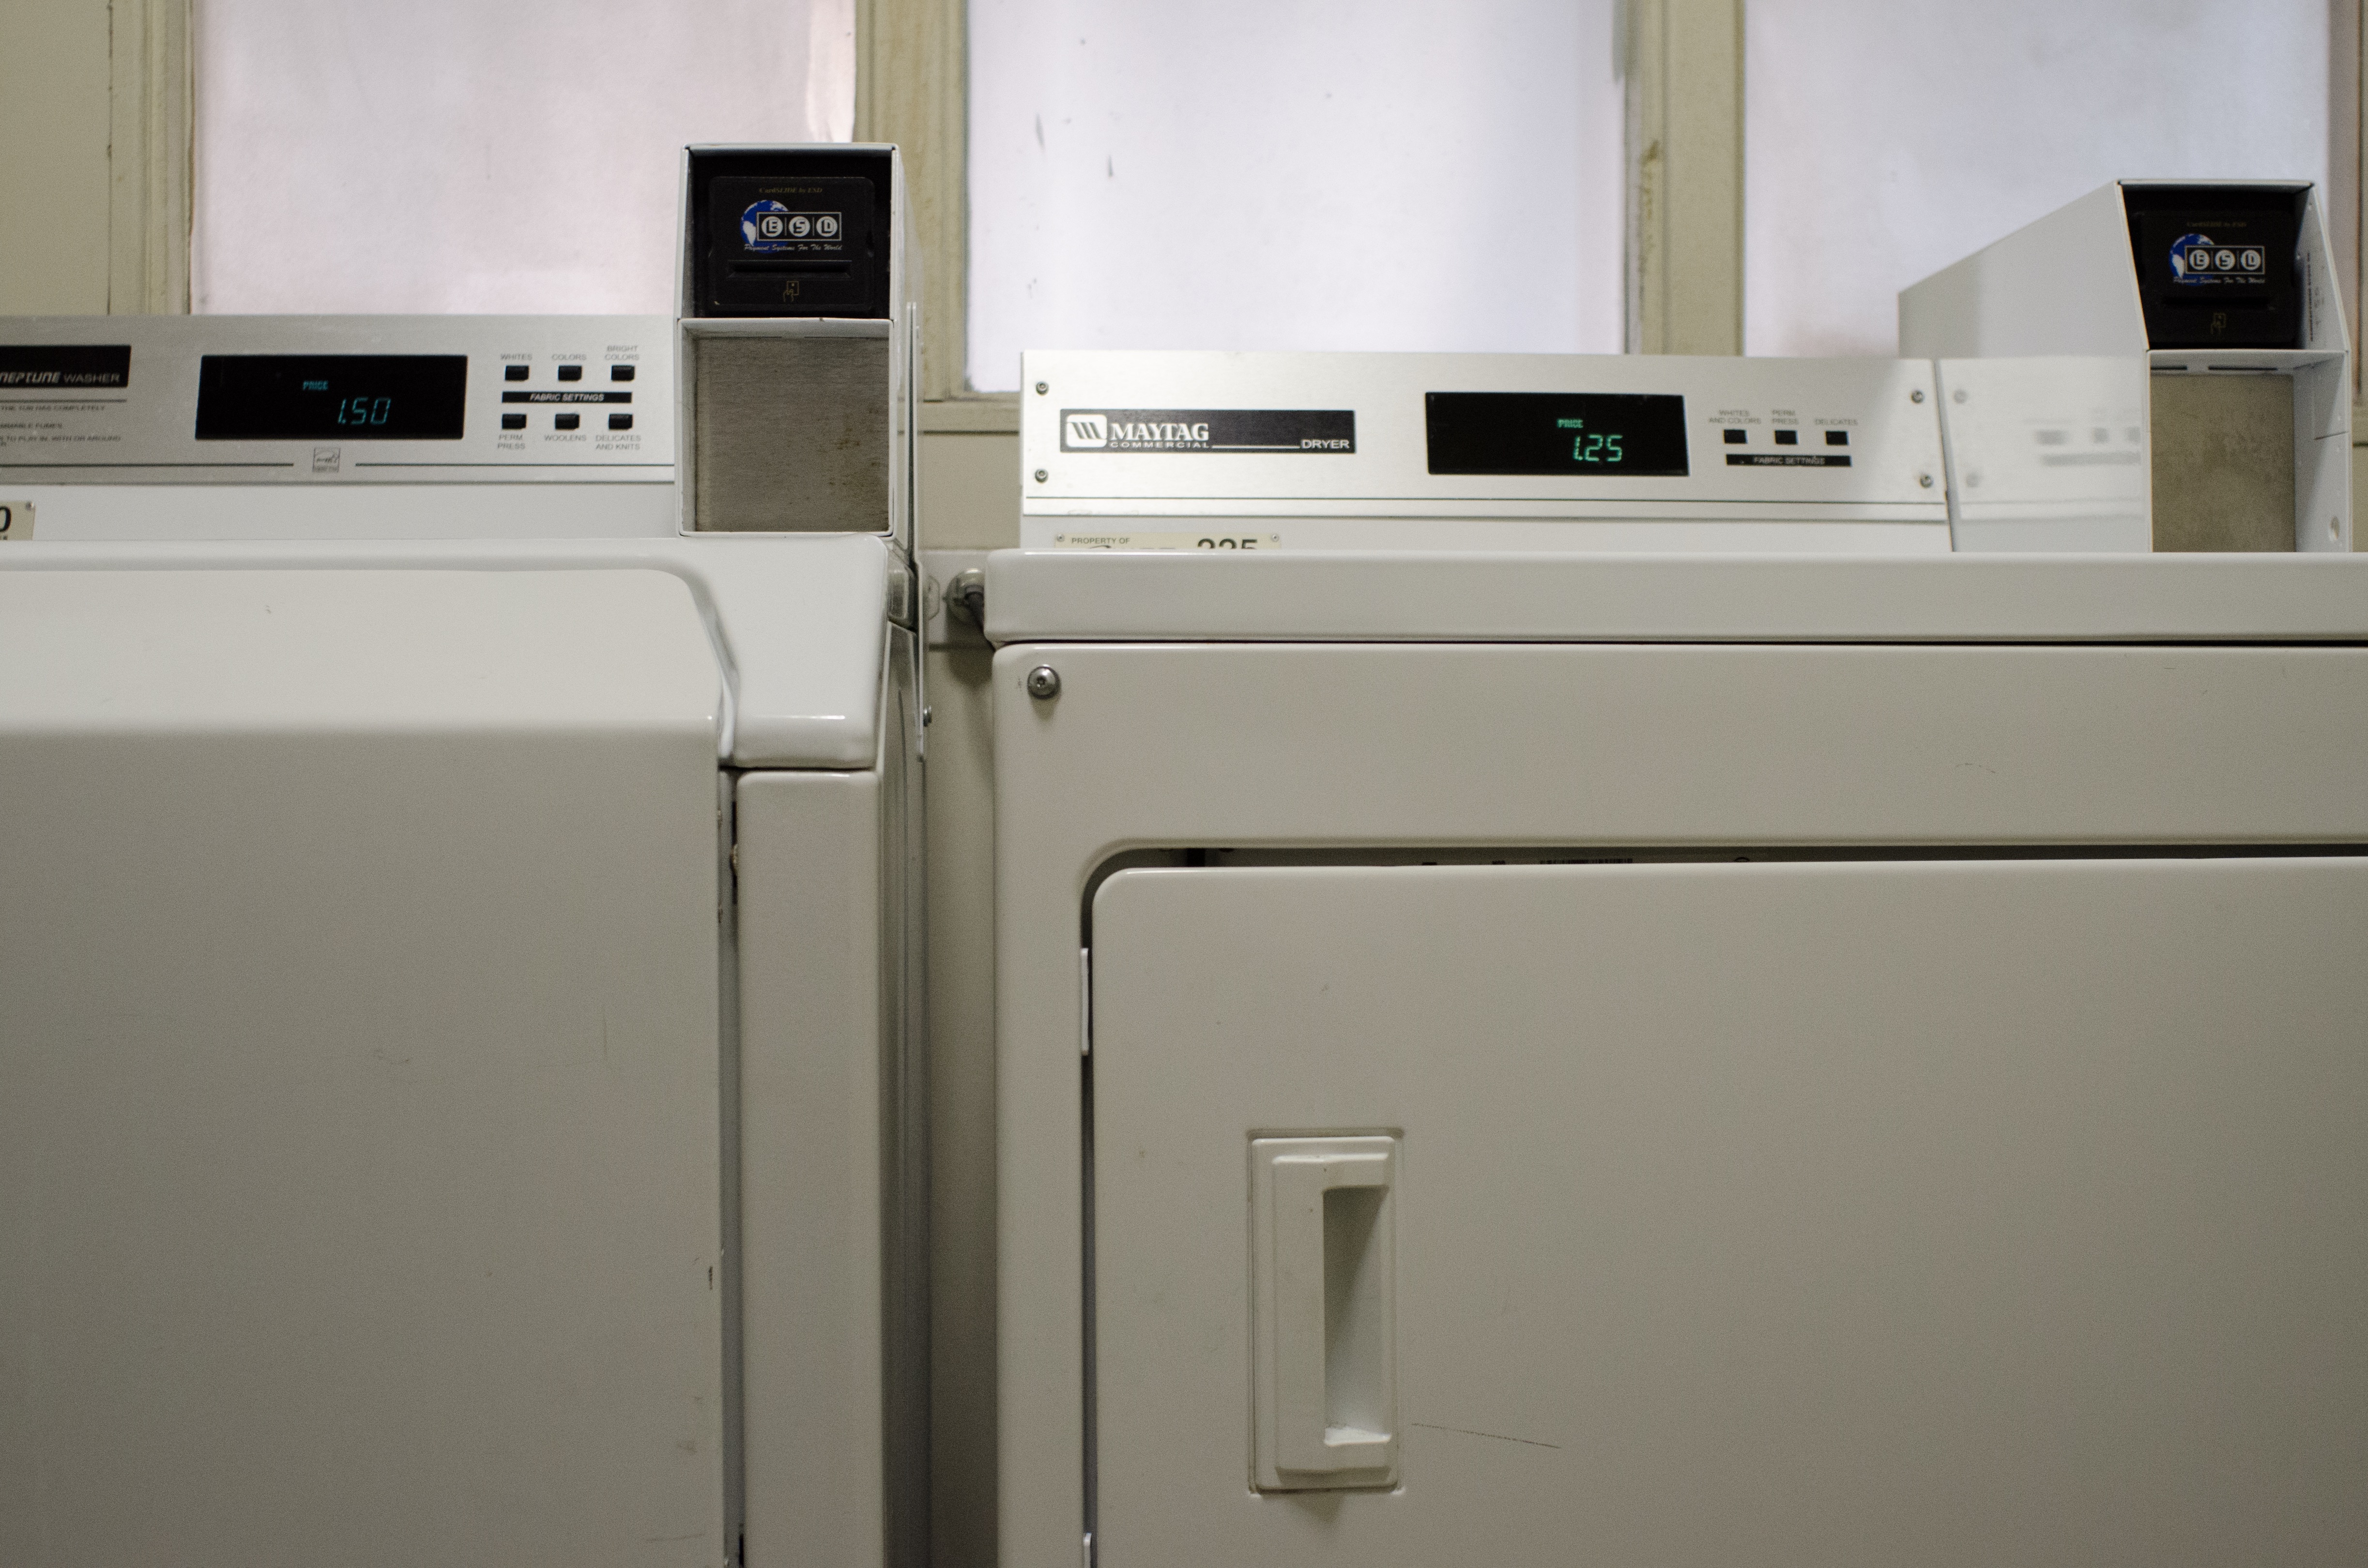 Image of the laundry room machine